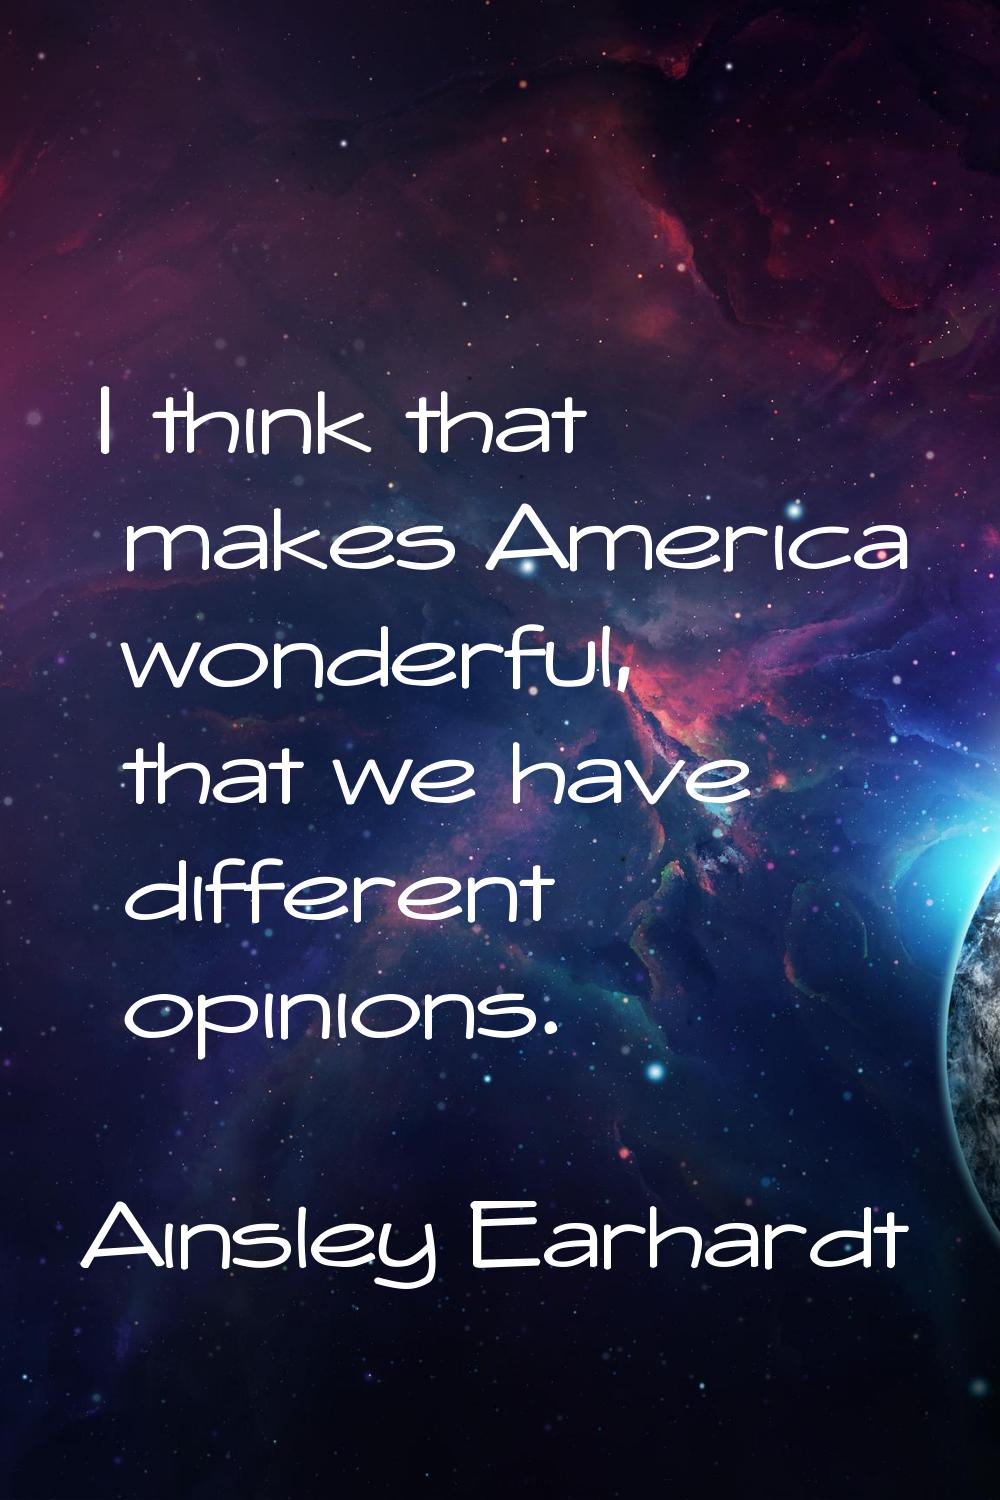 I think that makes America wonderful, that we have different opinions.